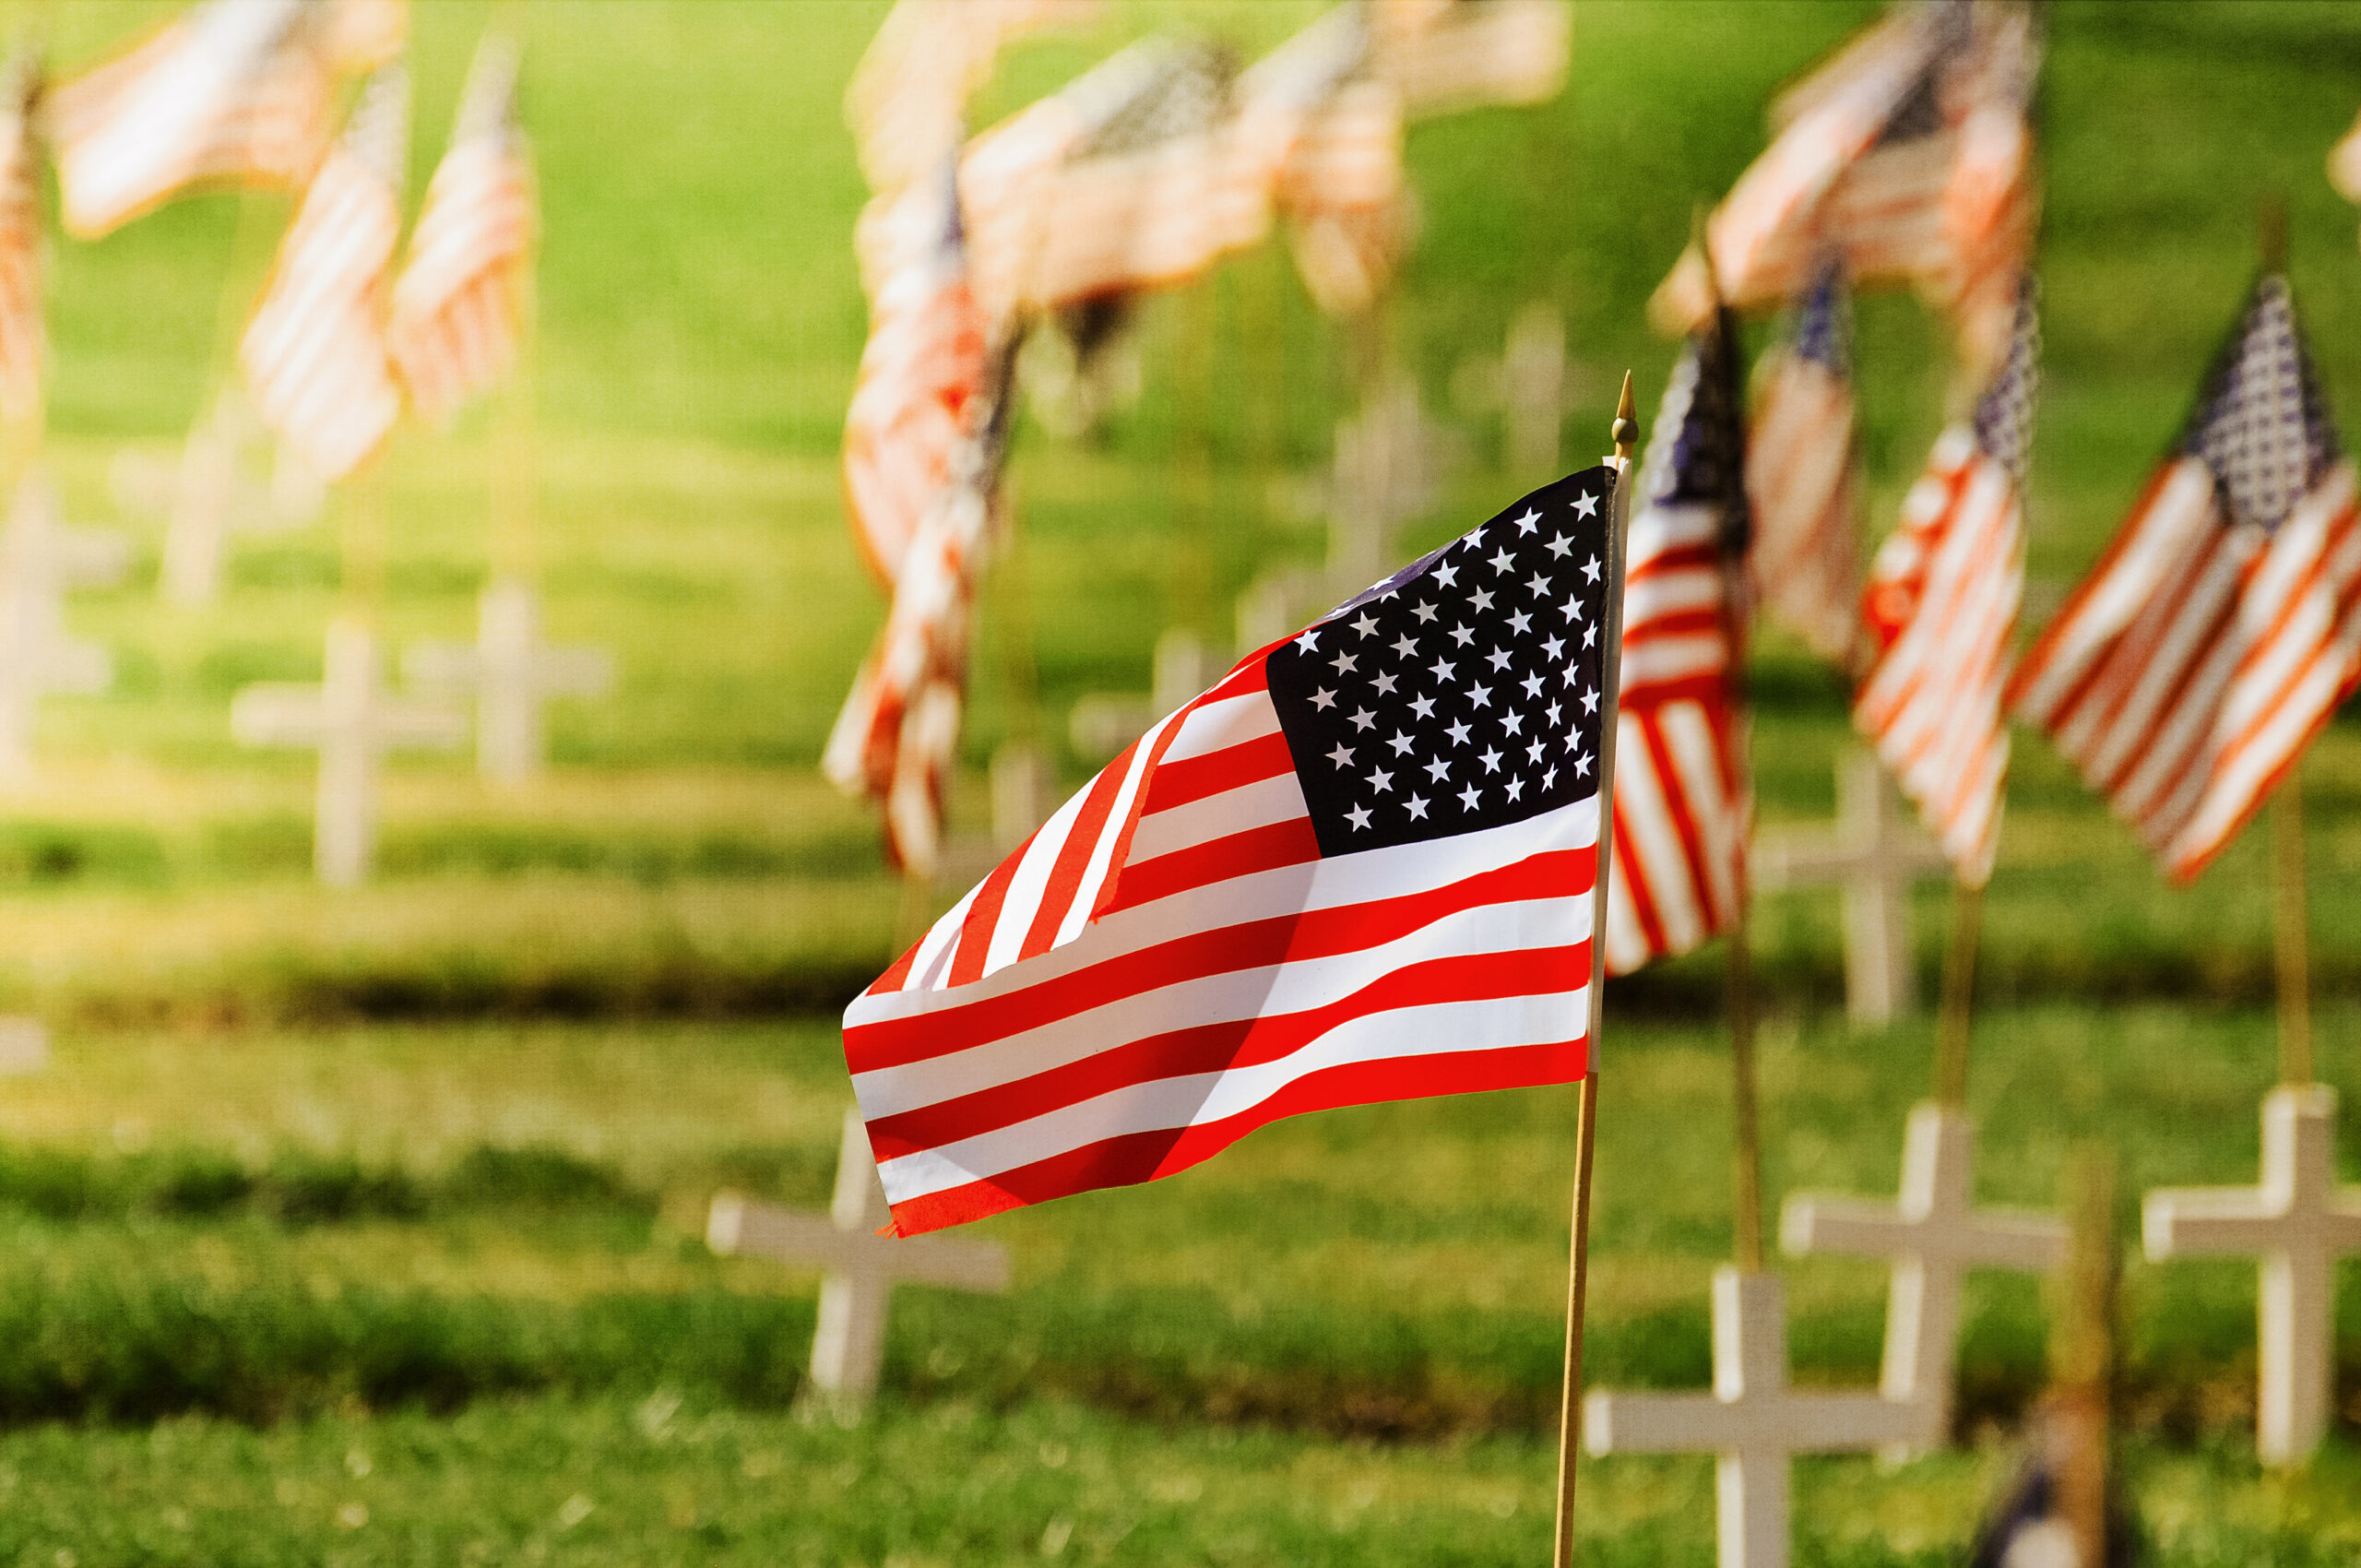 <h1 class="tribe-events-single-event-title">Memorial Day Services In Newton 5/29</h1>